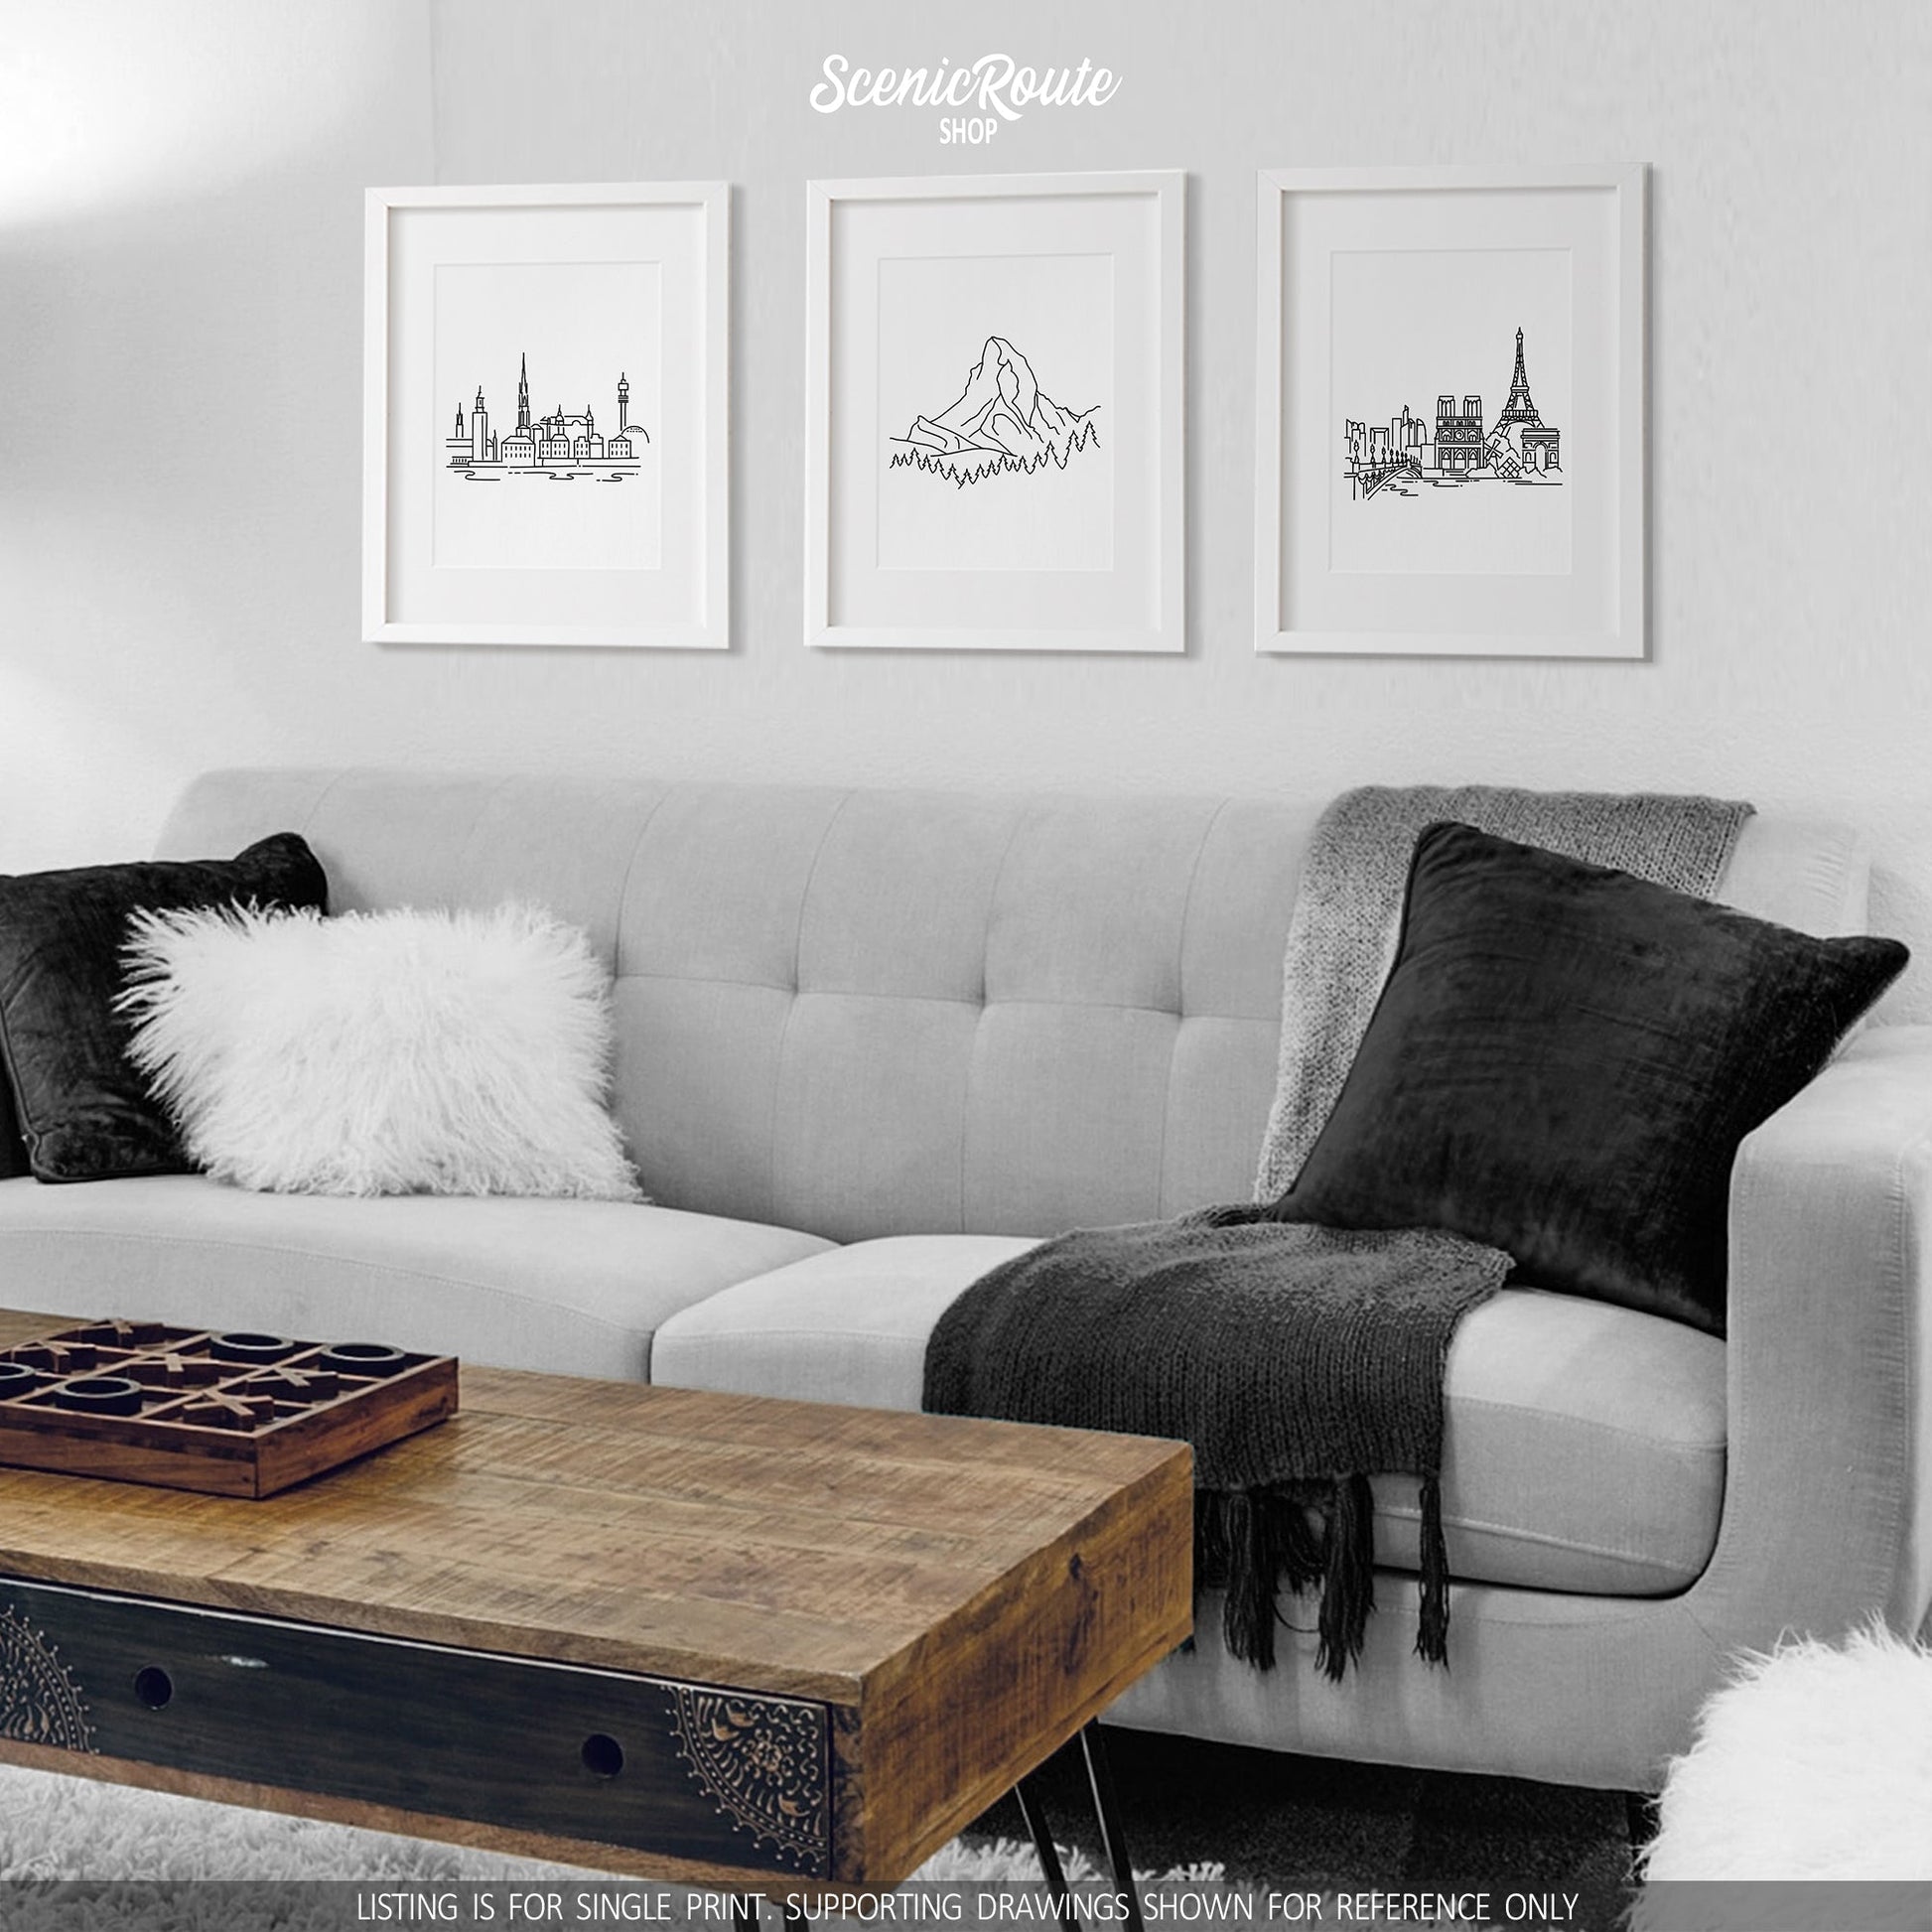 A group of three framed drawings on a white wall hanging above a couch with pillows and a blanket. The line art drawings include the Stockholm Skyline, the Matterhorn, and the Paris Skyline